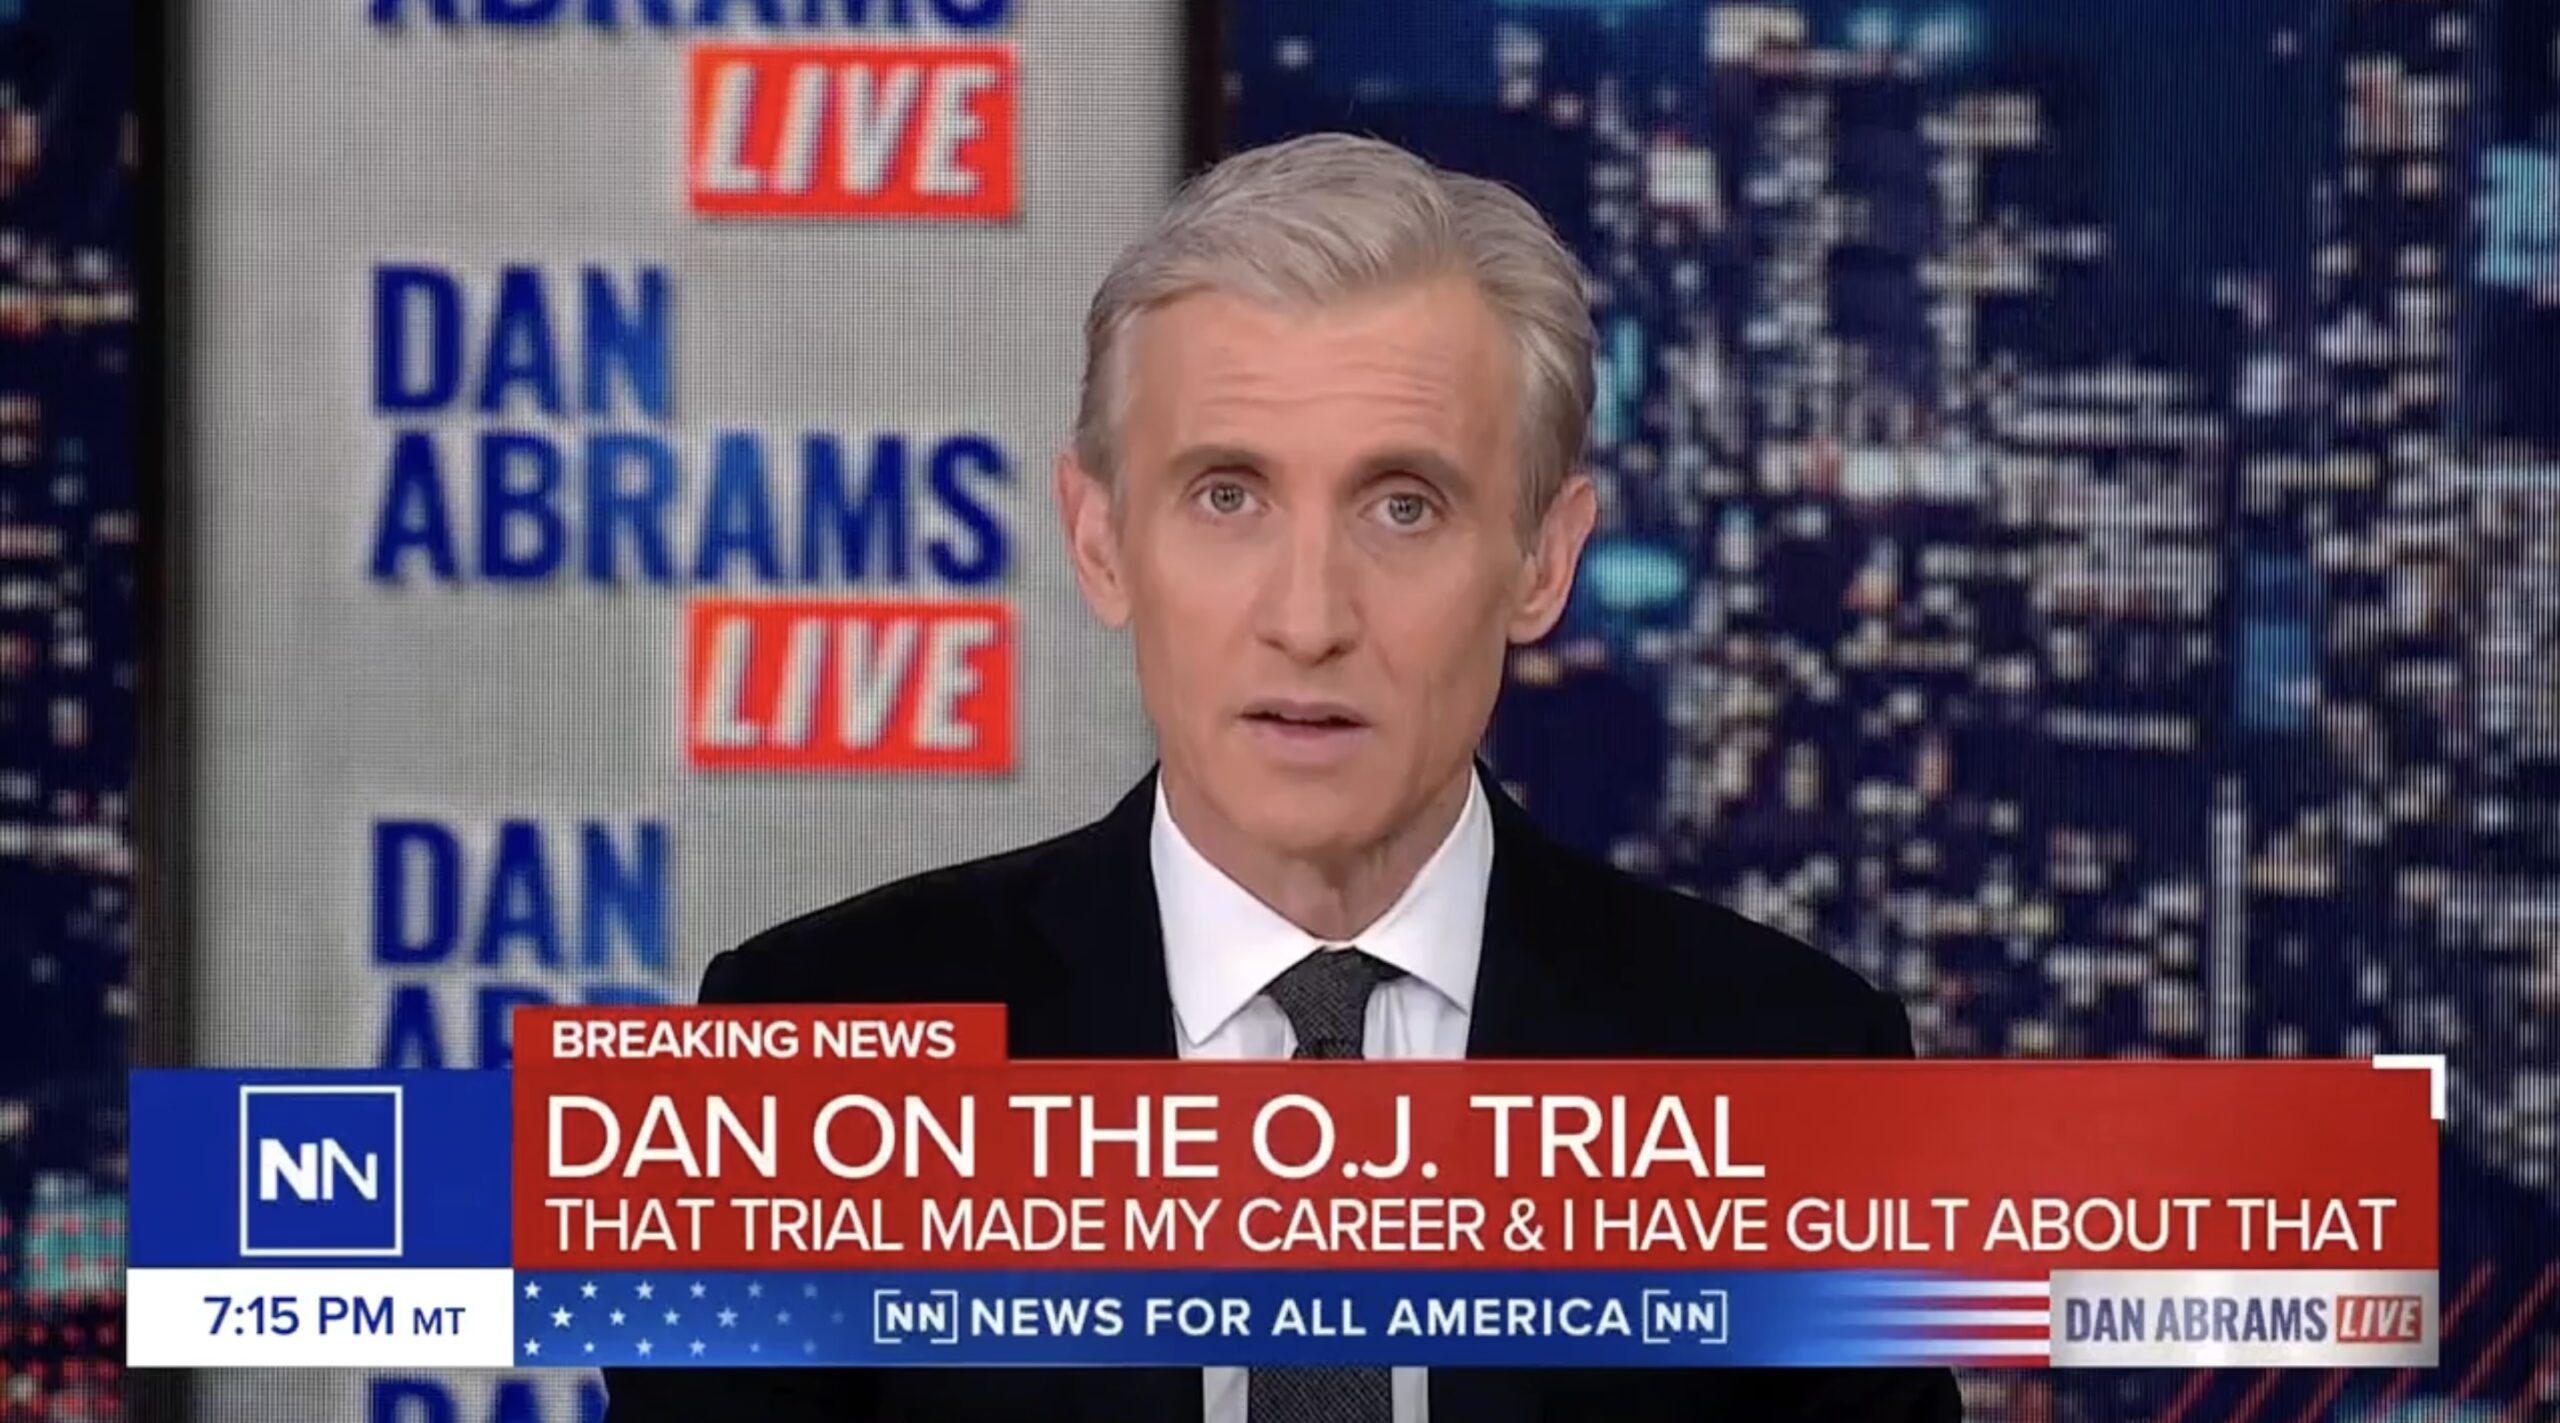 The Deaths of Two Totally Innocent People Helped Make My Career: Dan Abrams Opens Up About Guilt from O.J. Simpson Trial [Video]